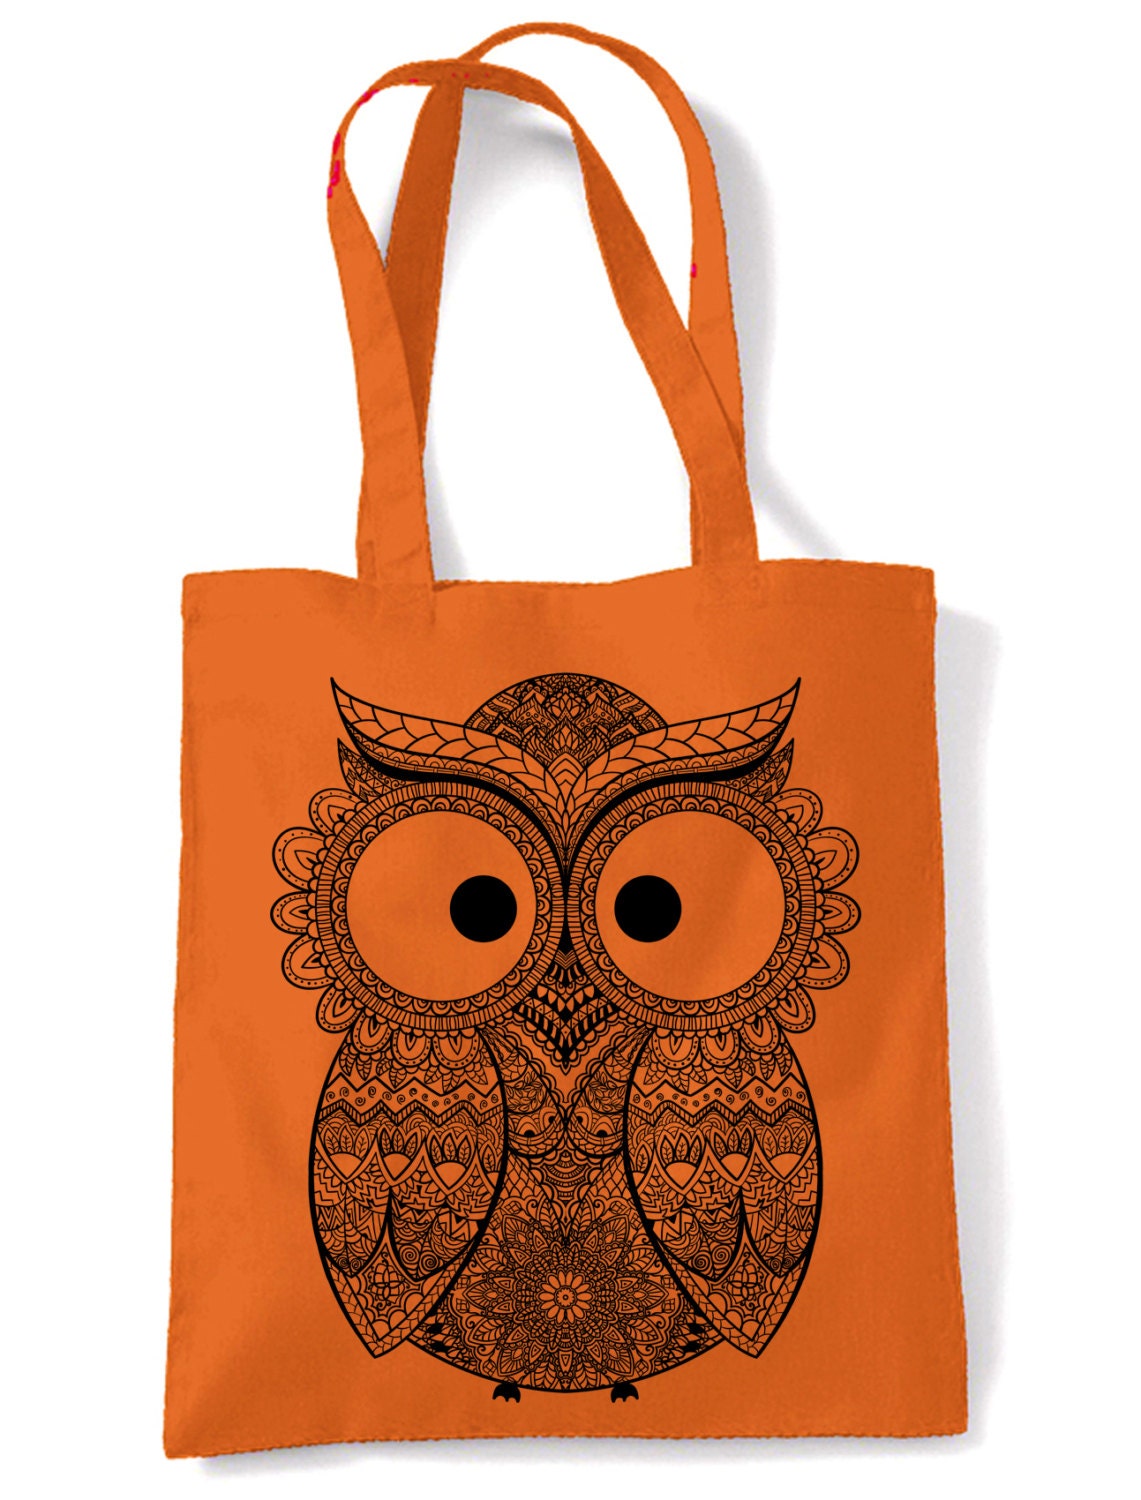 Buy Signare Owl Tote Bags Purses for Women/Shoulder Bag for Women/Beach Bag  for Women Tapestry/SHOU-OWL, Large at Amazon.in